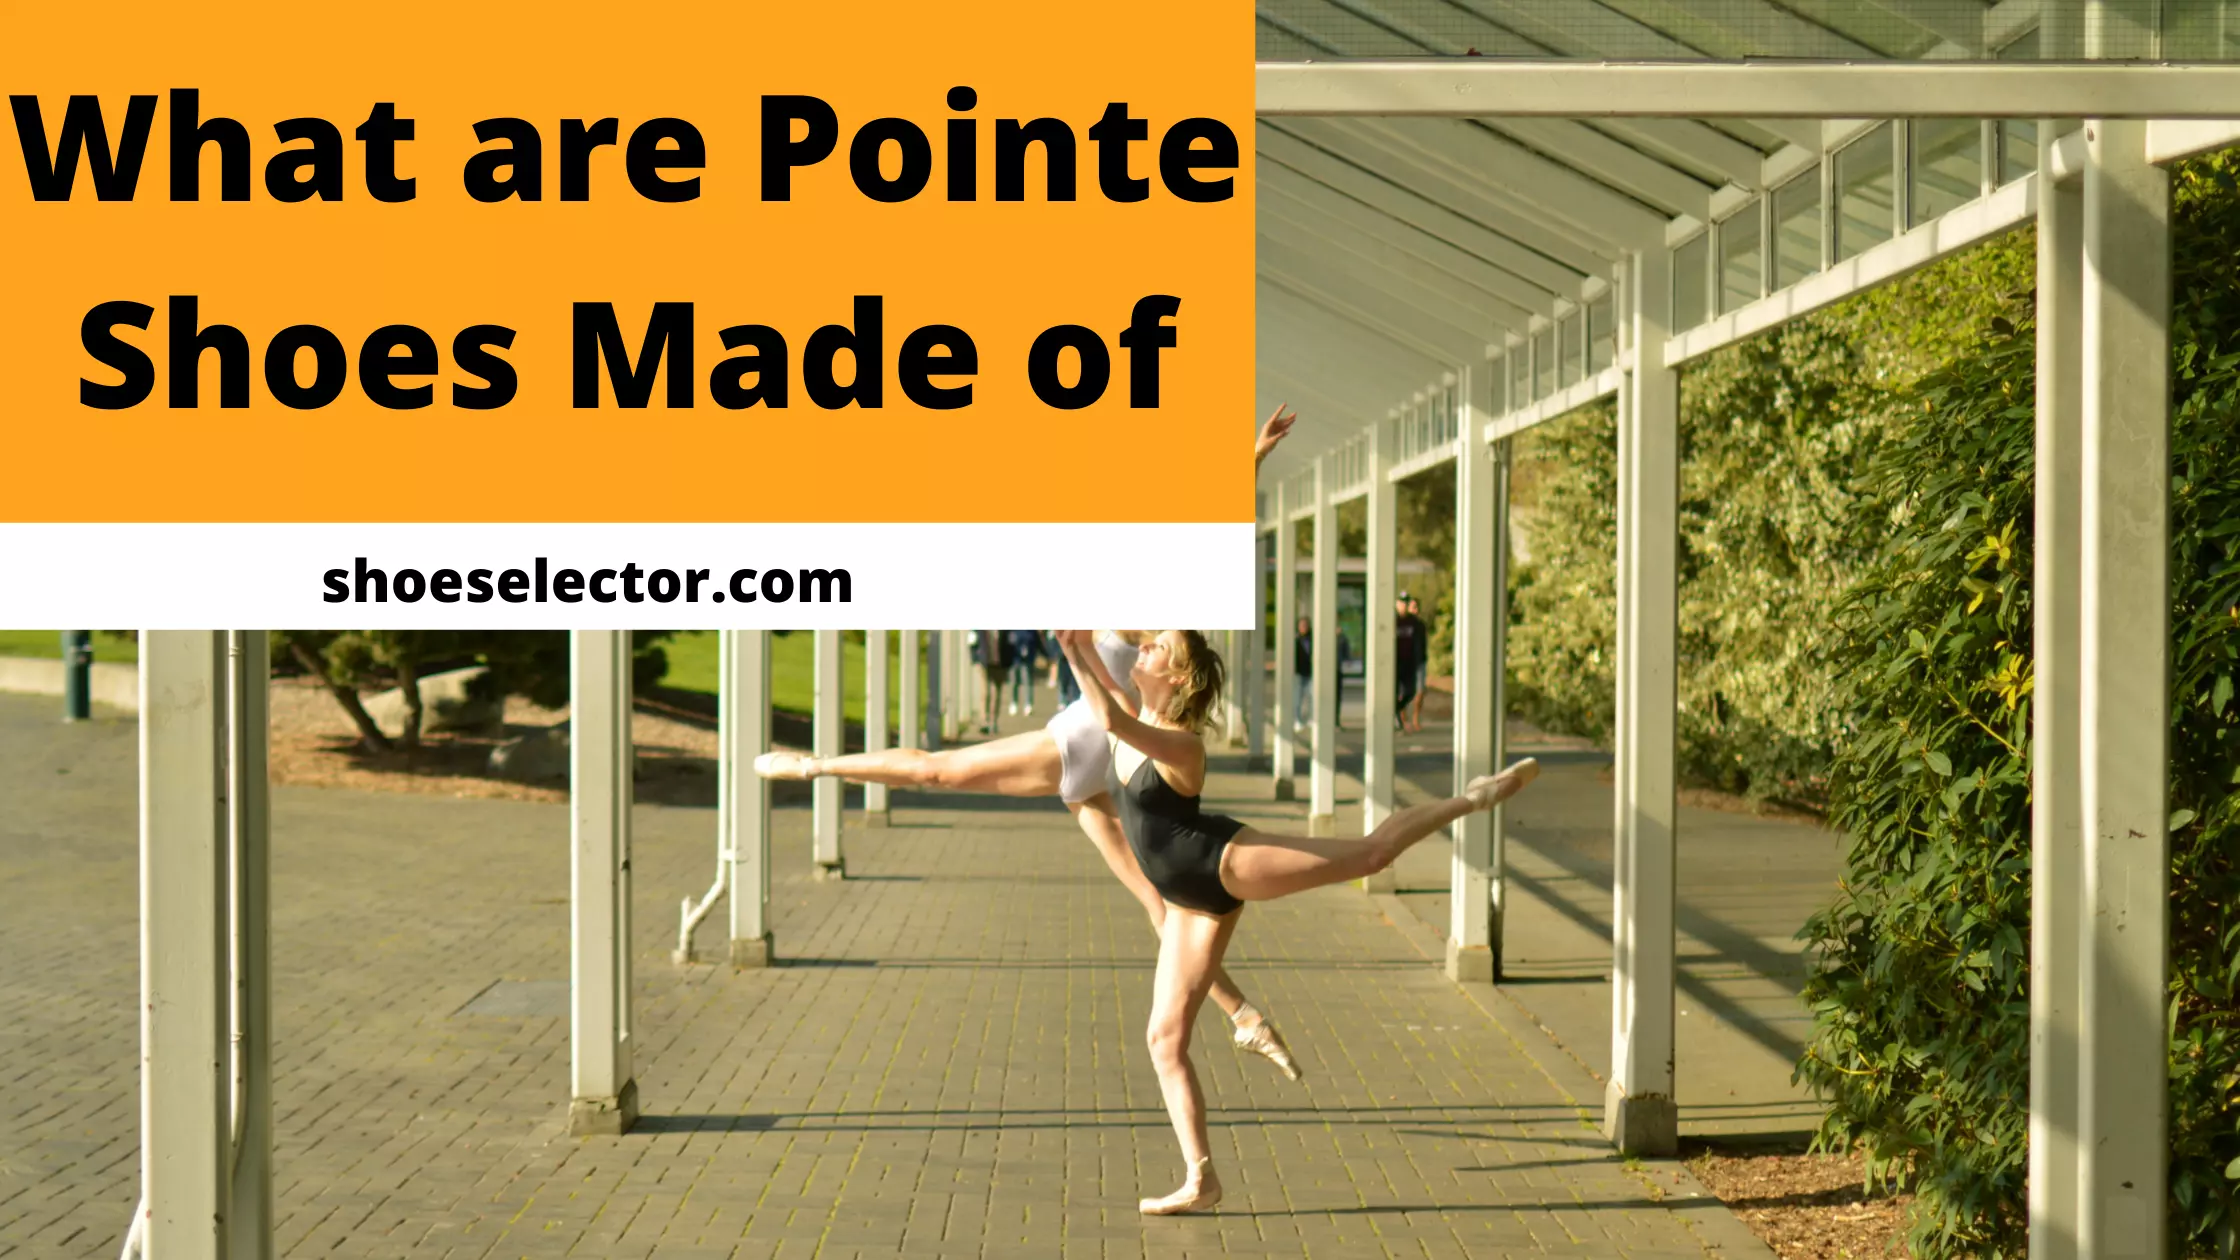 What Are Pointe Shoes Made of? - Complete Guide